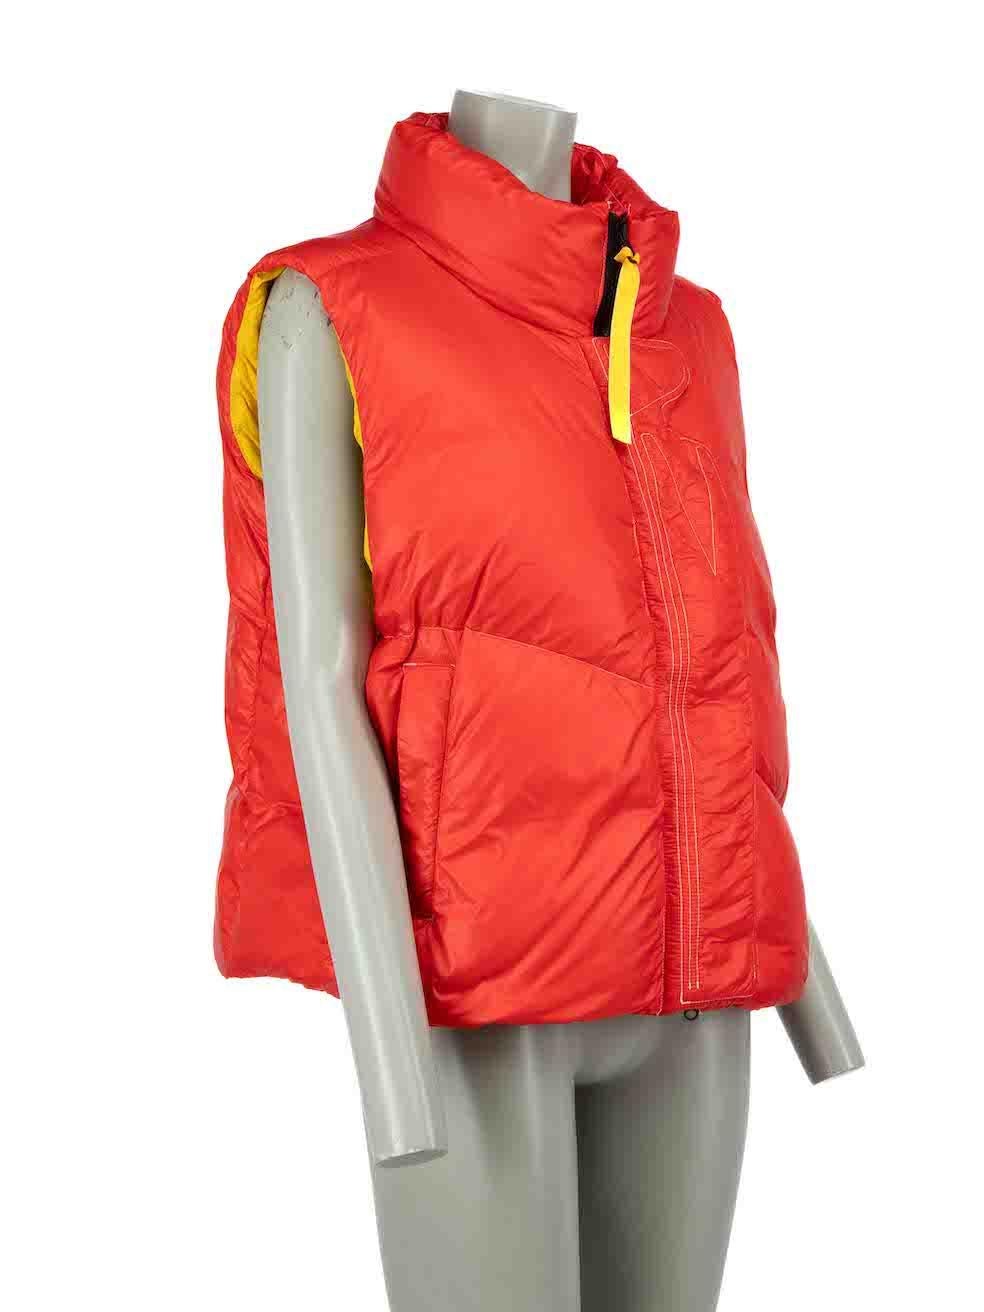 CONDITION is Never worn, with tags. No visible wear to jacket is evident on this new Canada Goose x Pyer Moss designer resale item.

Details
Canada Goose x Pyer Moss
Red
Synthetic
Down puffer gilet
Zip and snap button fastening
2x Side pockets
Made